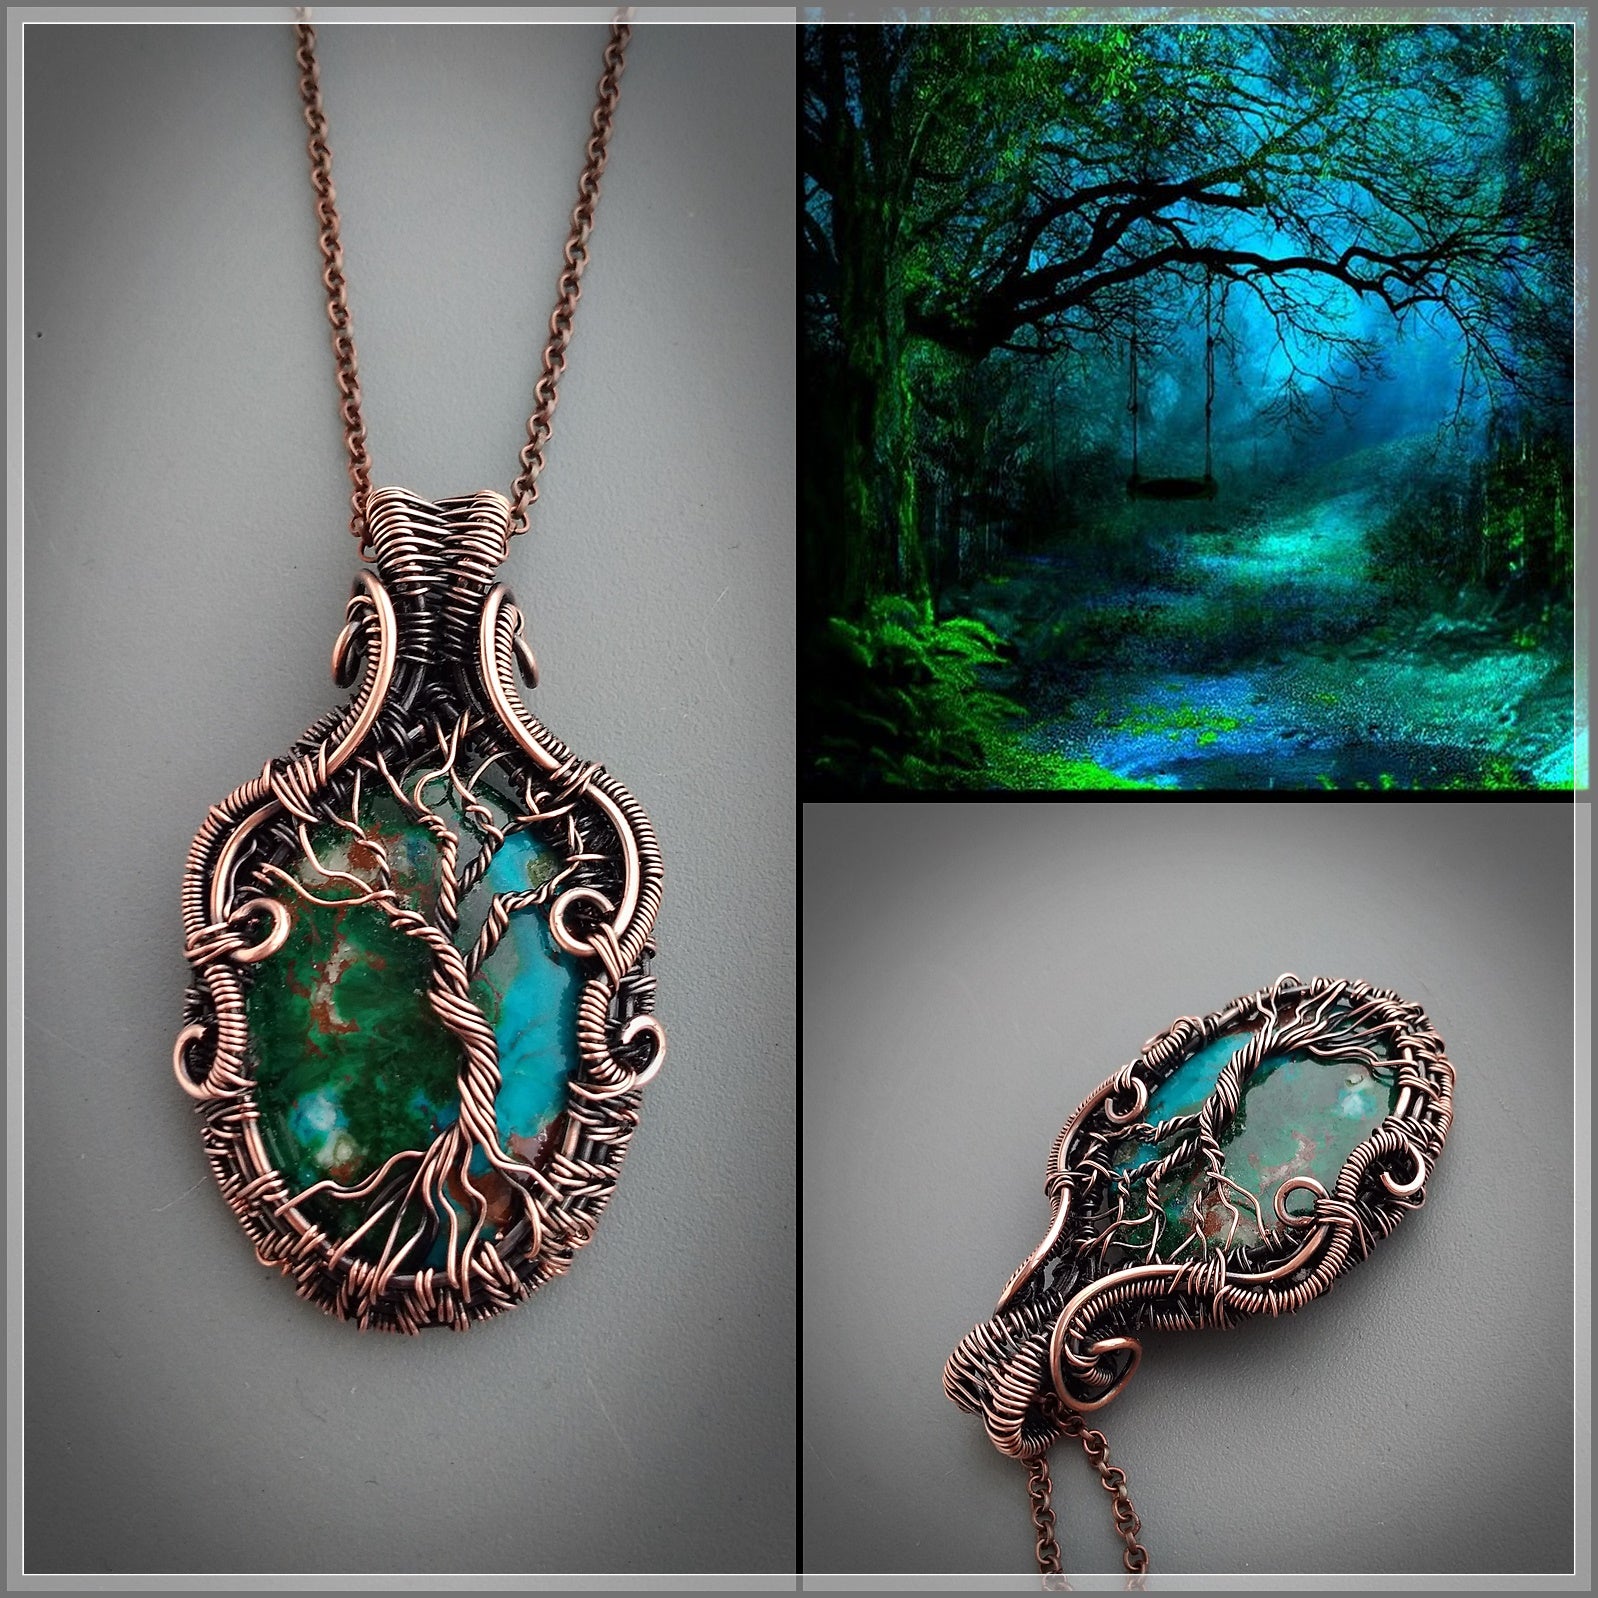 Handmade copper tree of life necklace with natural blue chrysocolla stone